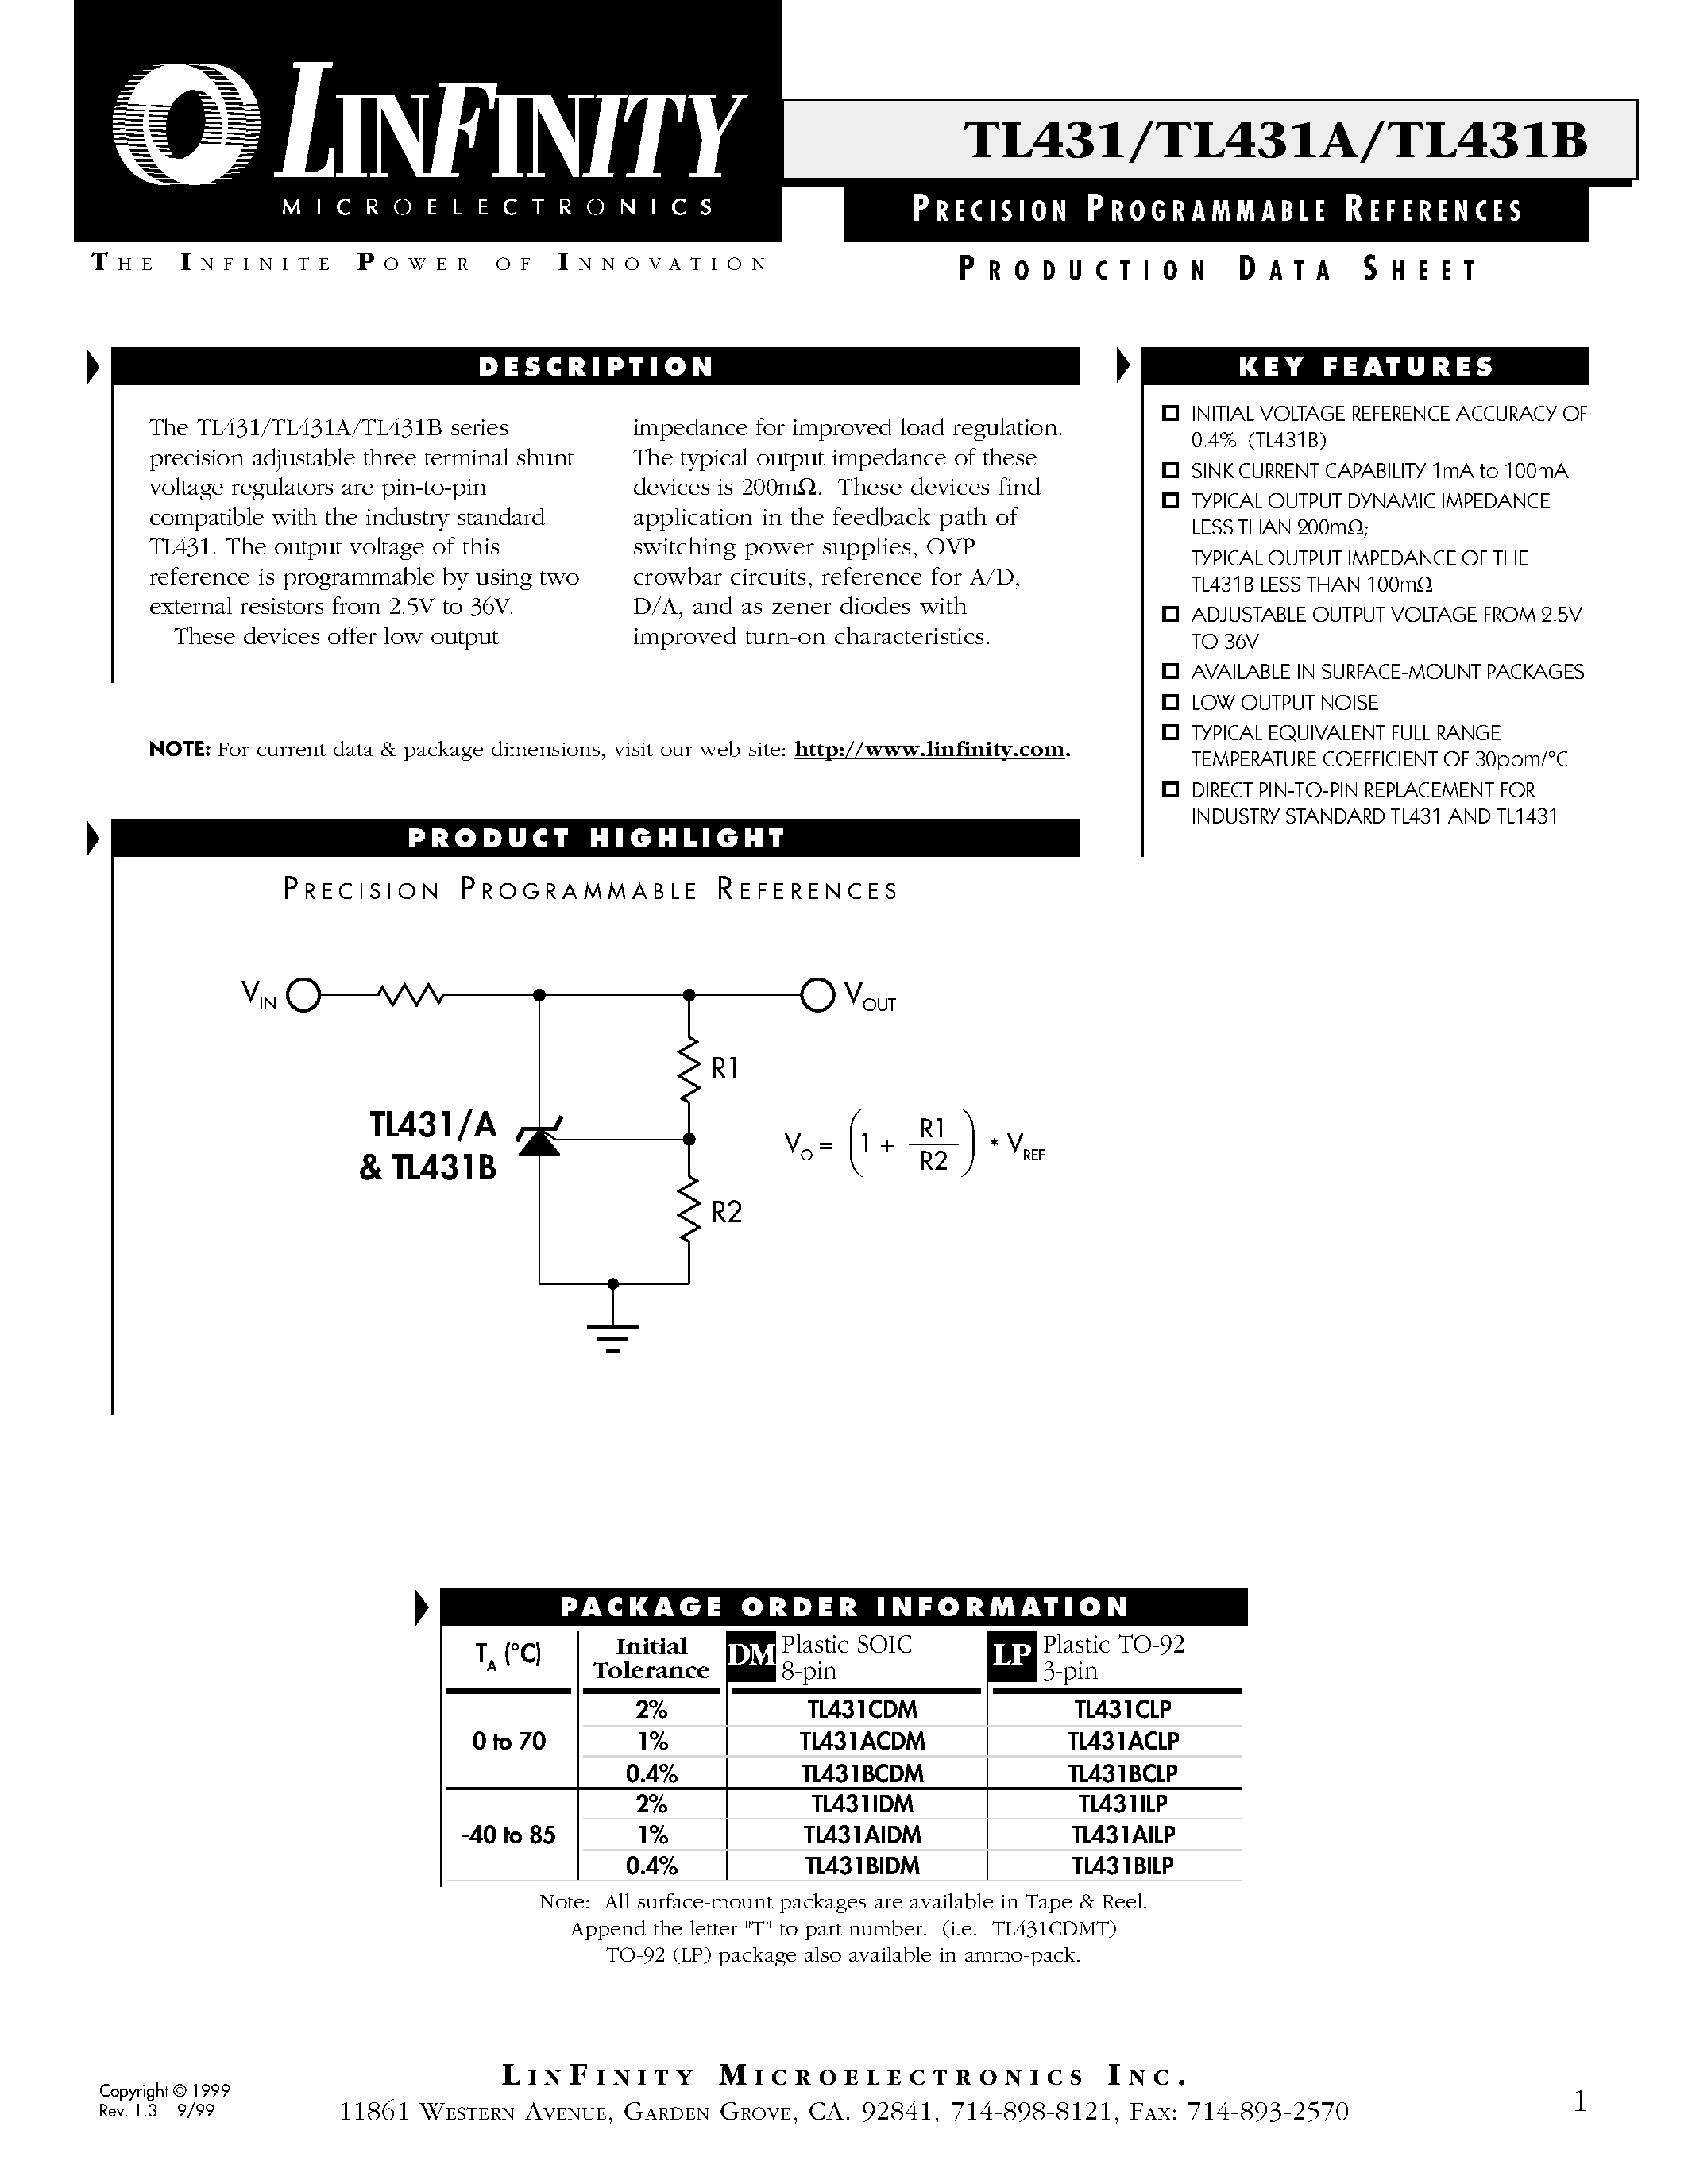 Datasheet TL431ACDM - PRECISION PROGRAMMABLE REFERENCES page 1